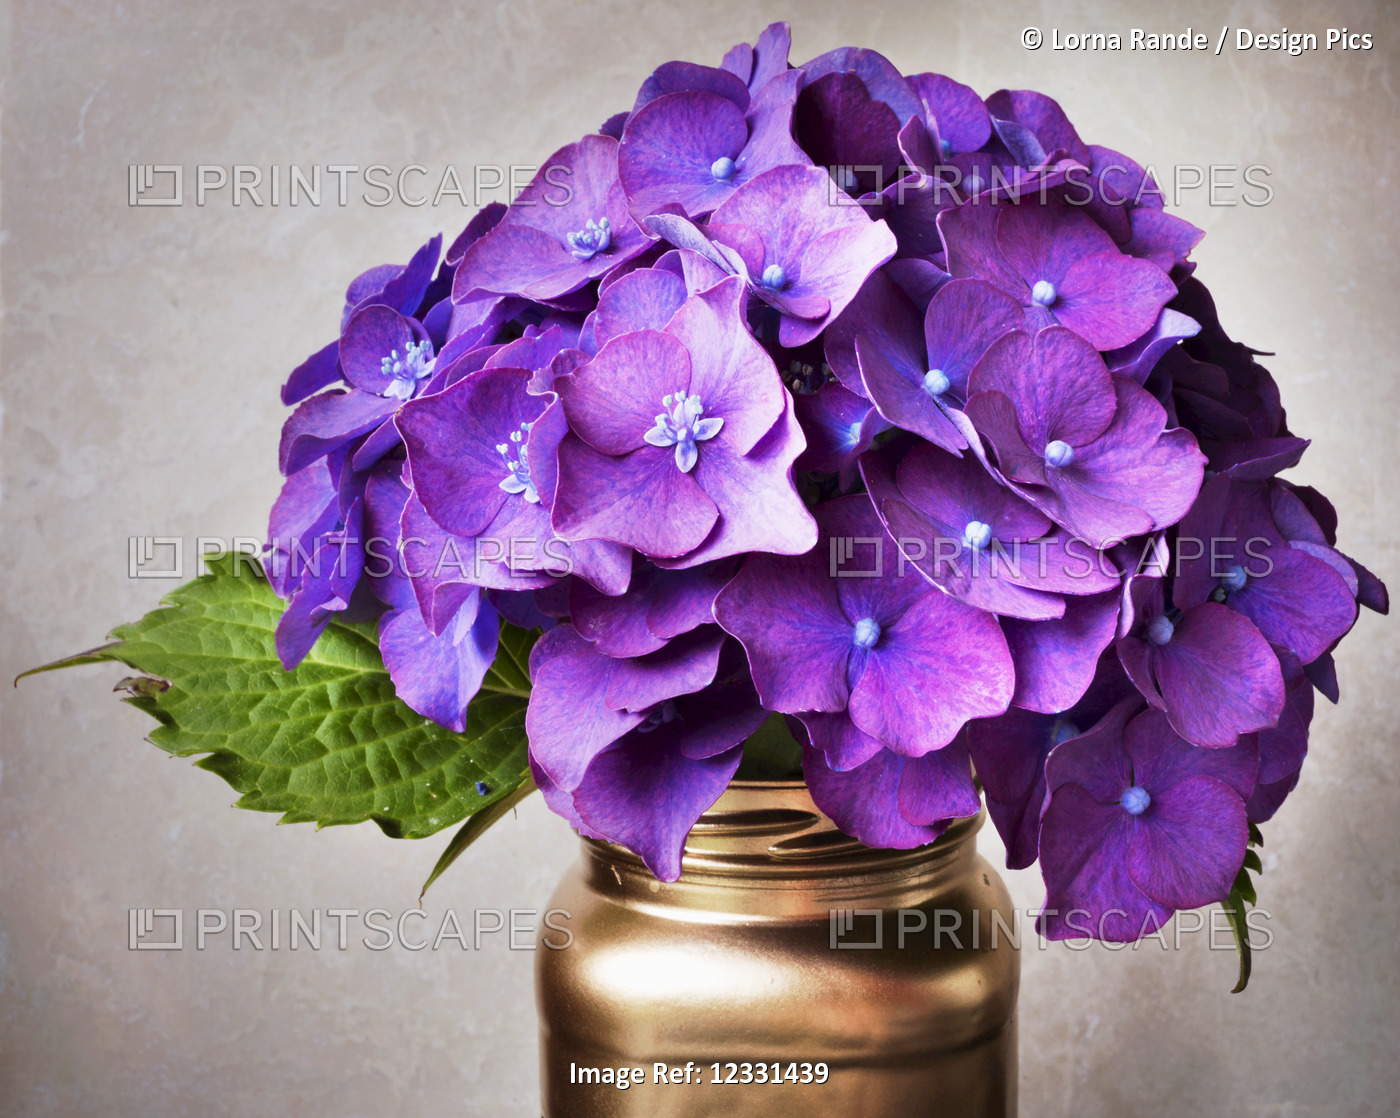 Purple Hydrangea Flowers And Leaf In A Copper Jar On A Gray Background